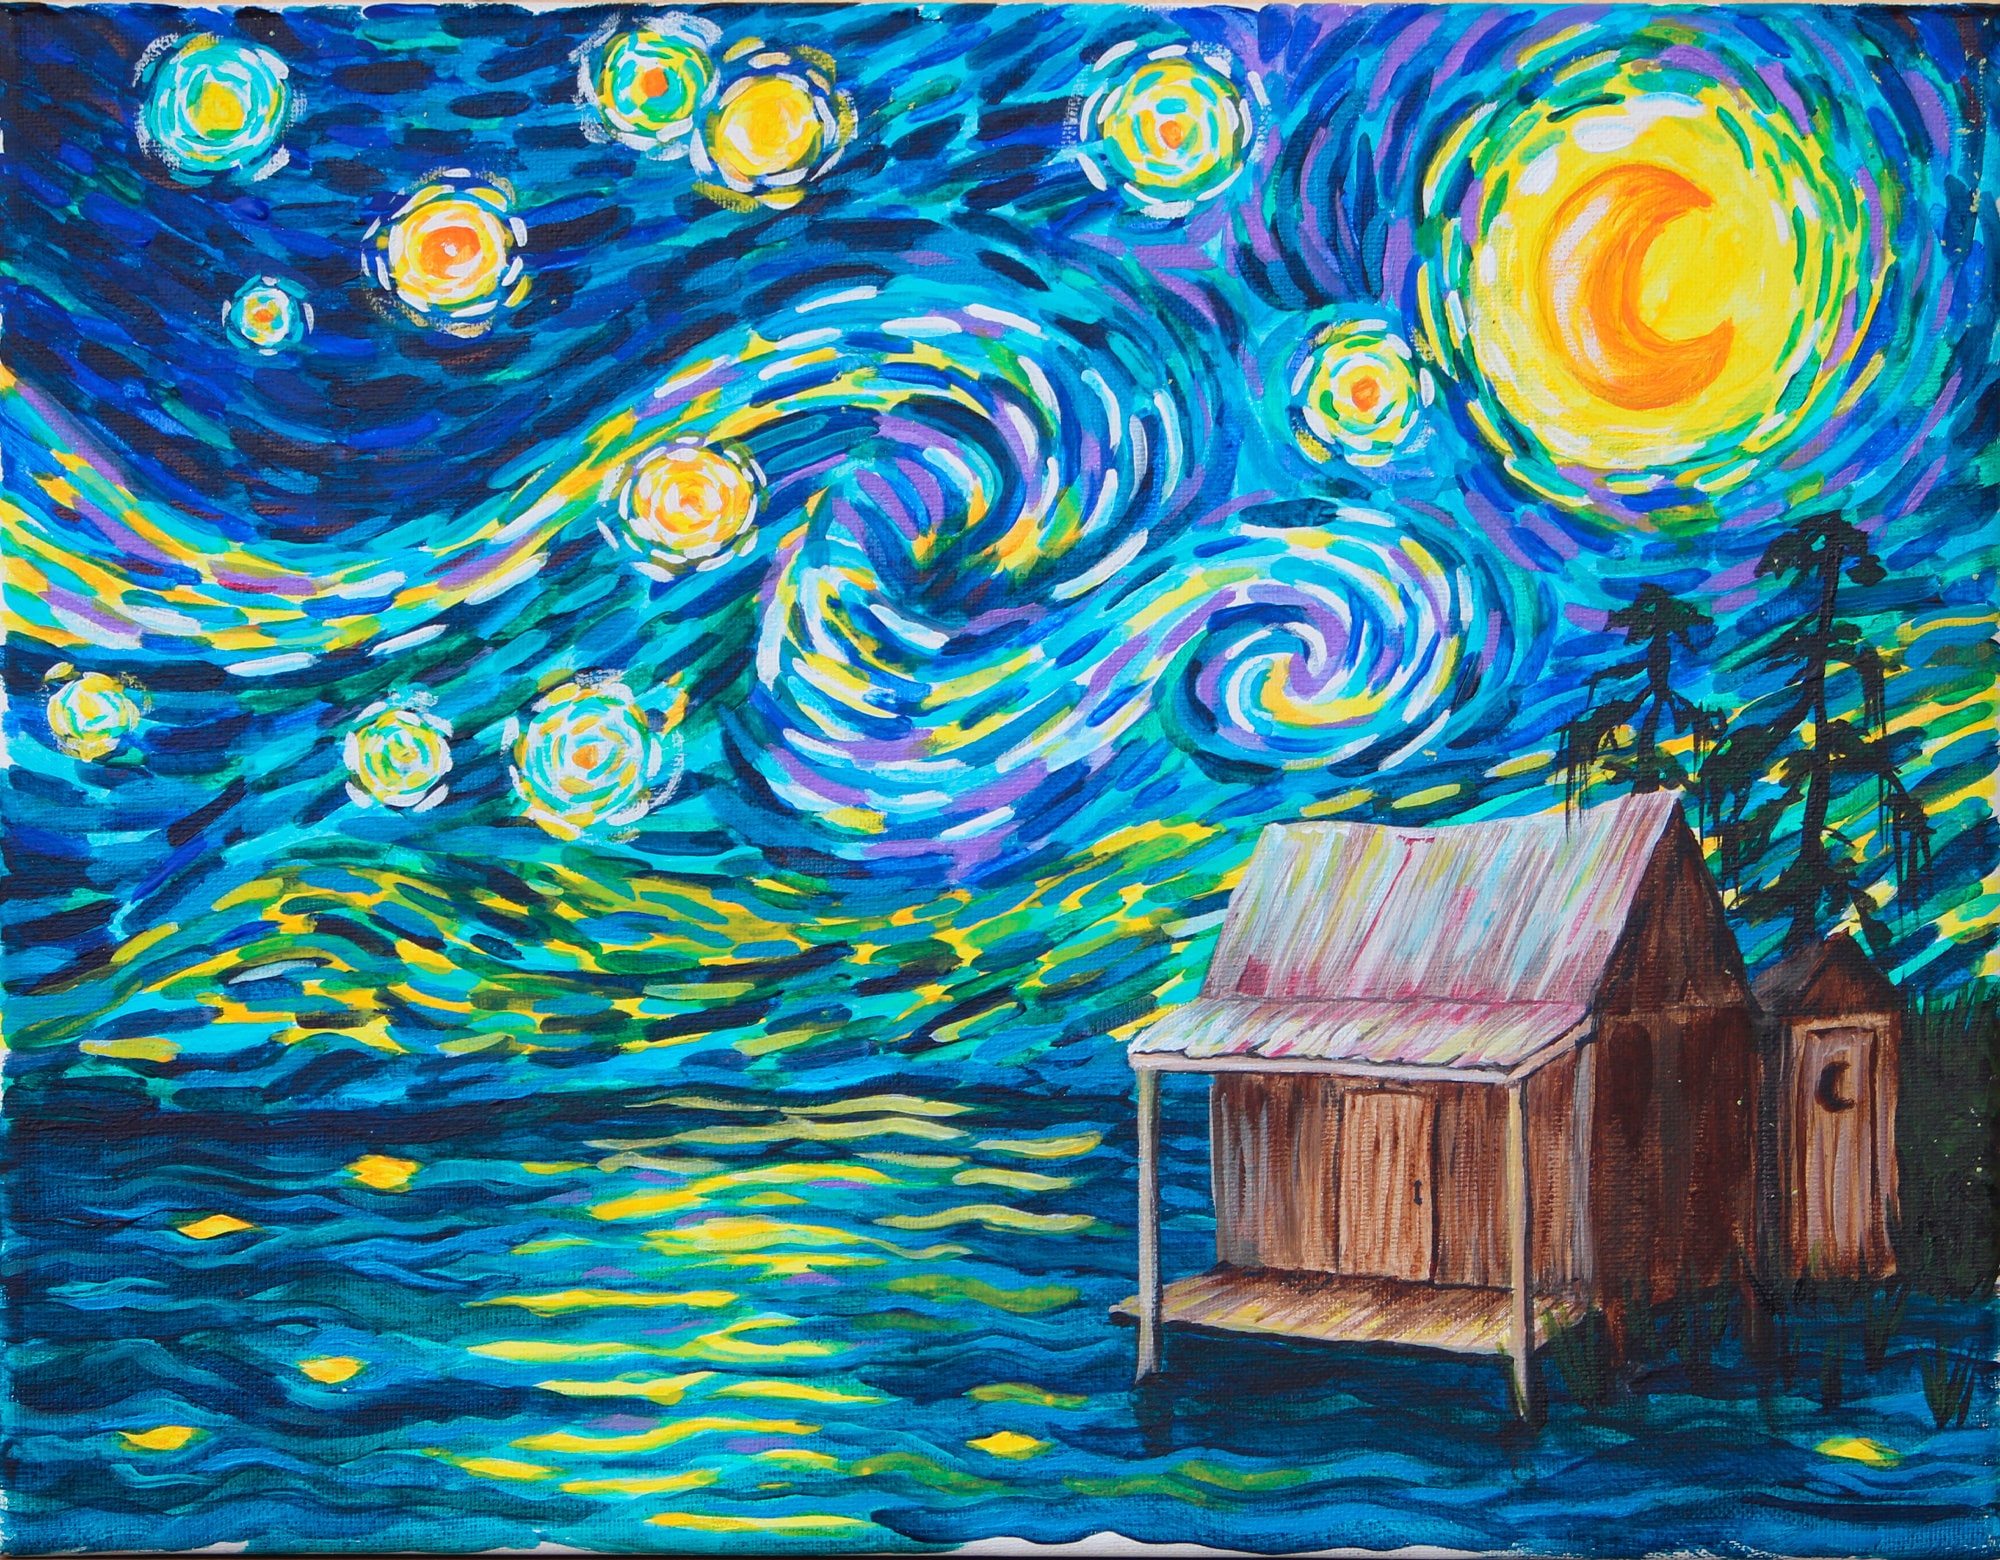 Starry Night Fly Fisherman Picture Watercolor 8.5 X 11 Fishing Art Print  Vincent Van Gogh Painting by Barry Singer Trout Fishing Decor 